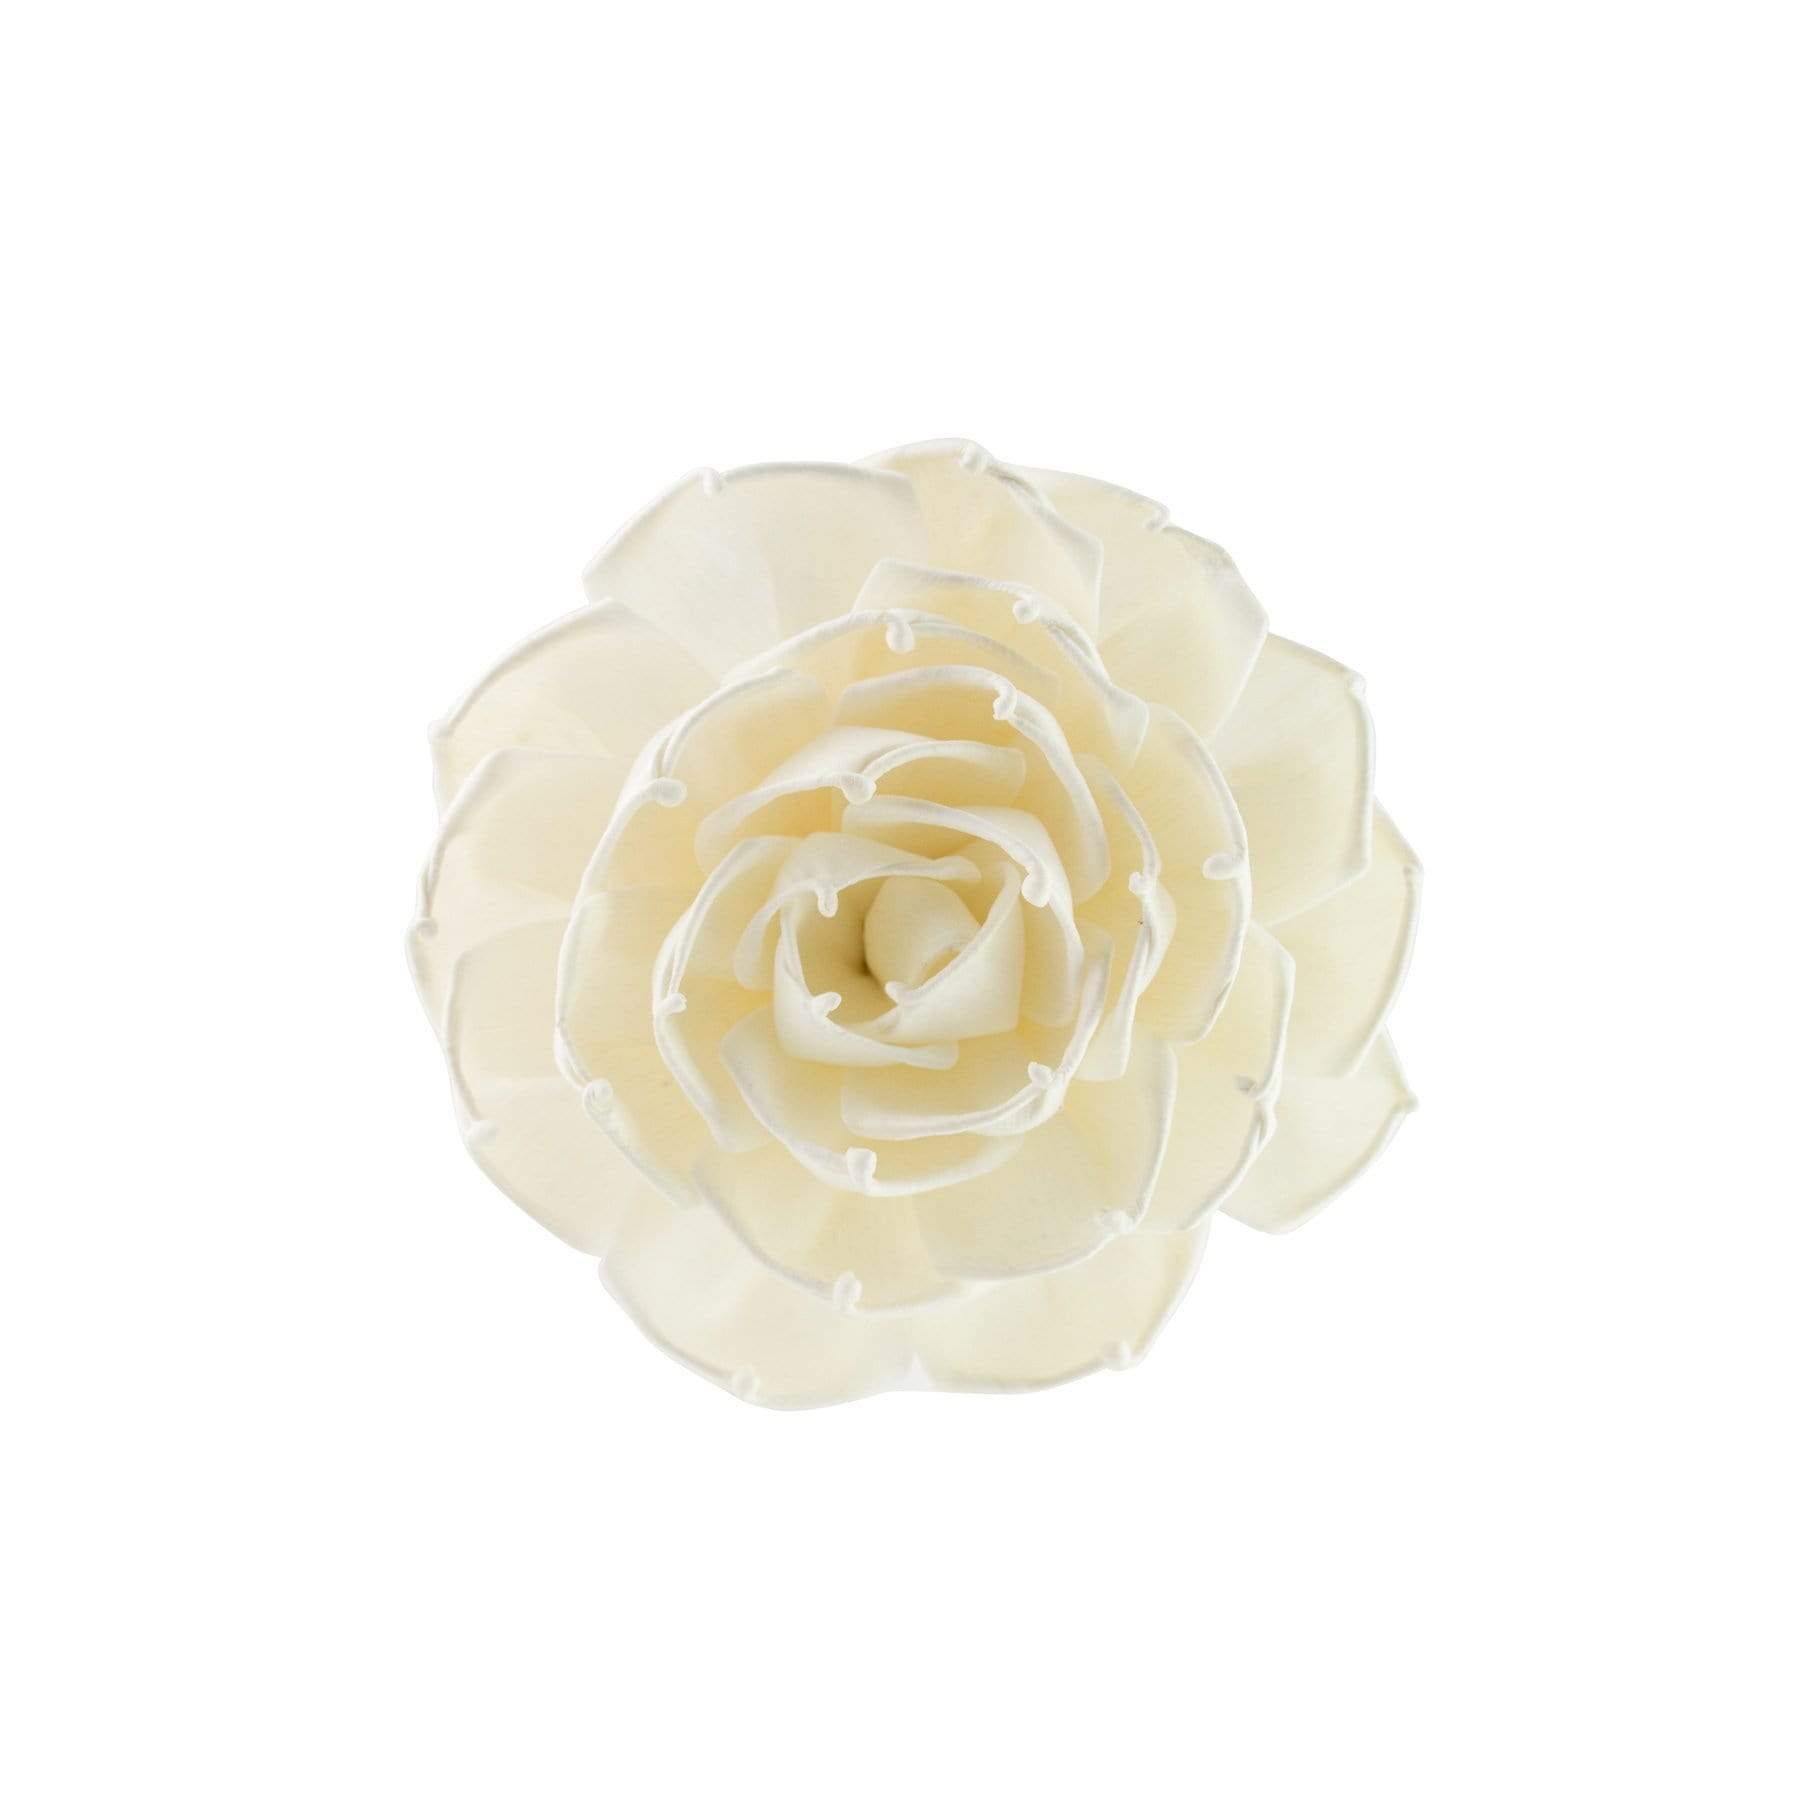 HYSSES Home Scents 2.5" Solar Flower Diffuser Refill - Rose 2.5"